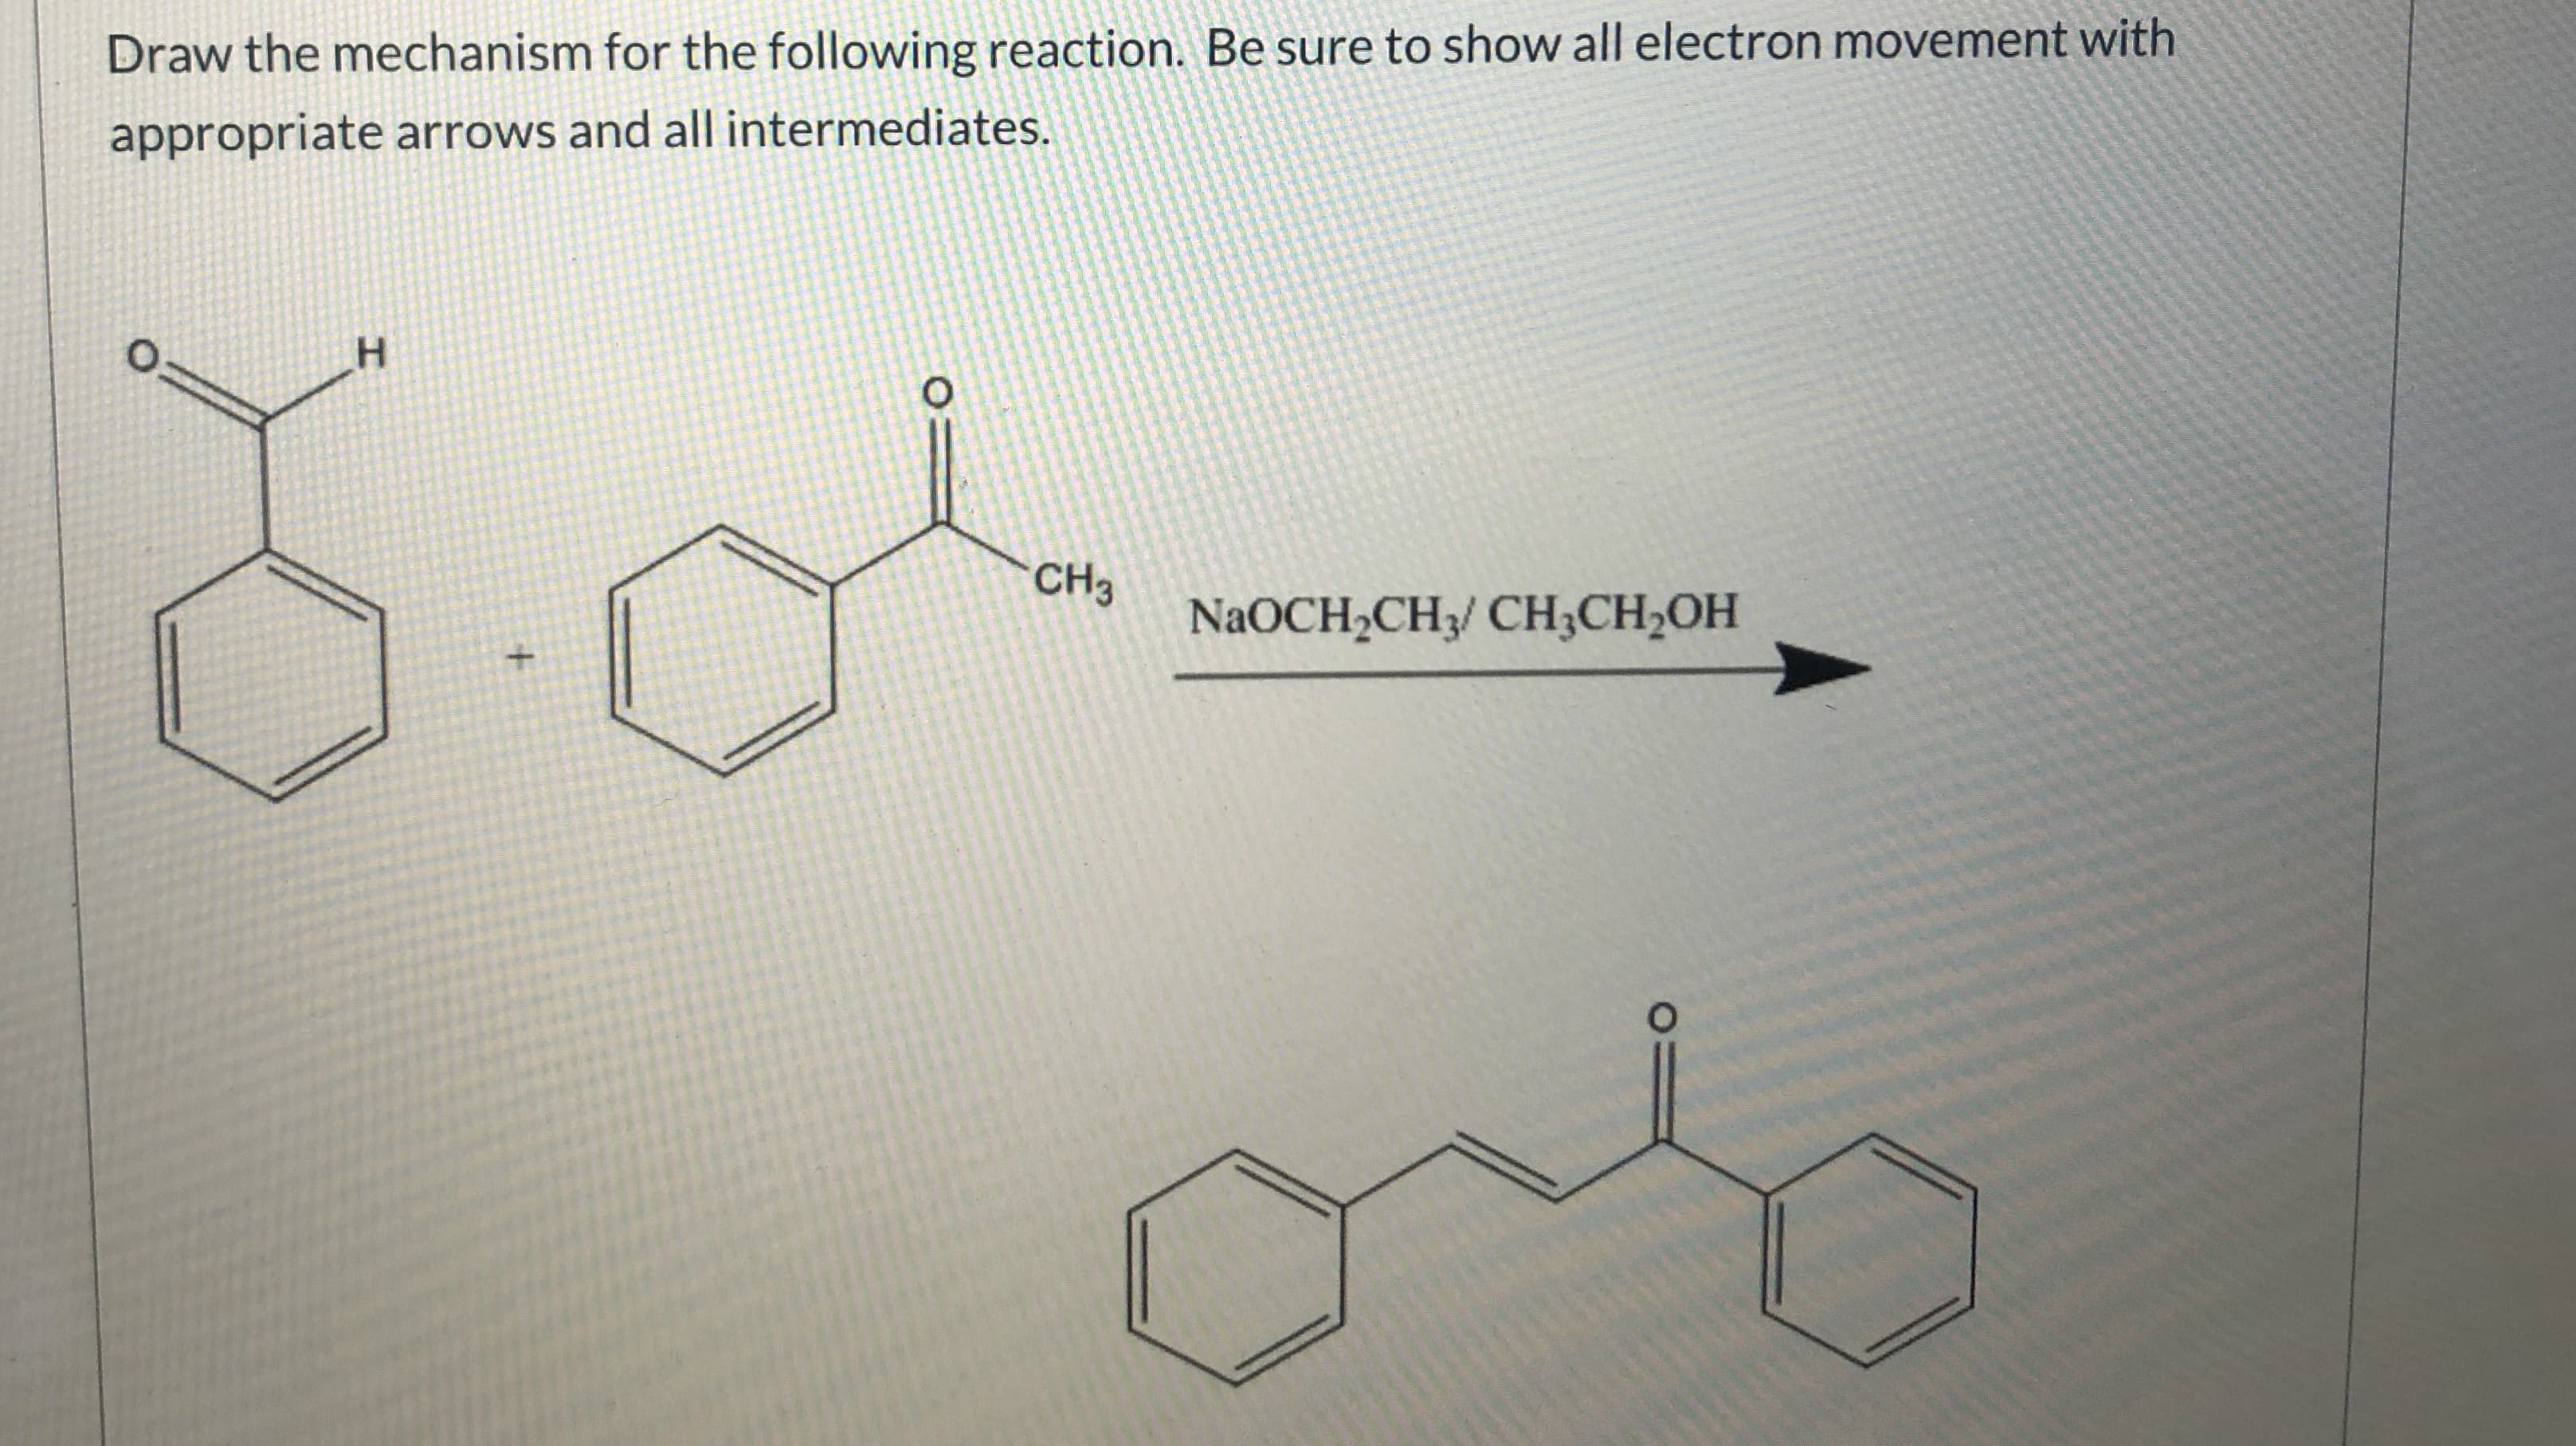 Draw the mechanism for the following reaction. Be sure to show all electPoh move
appropriate arrows and all intermediates.
CH3
NaOCH,CH CH,CH-ОН
